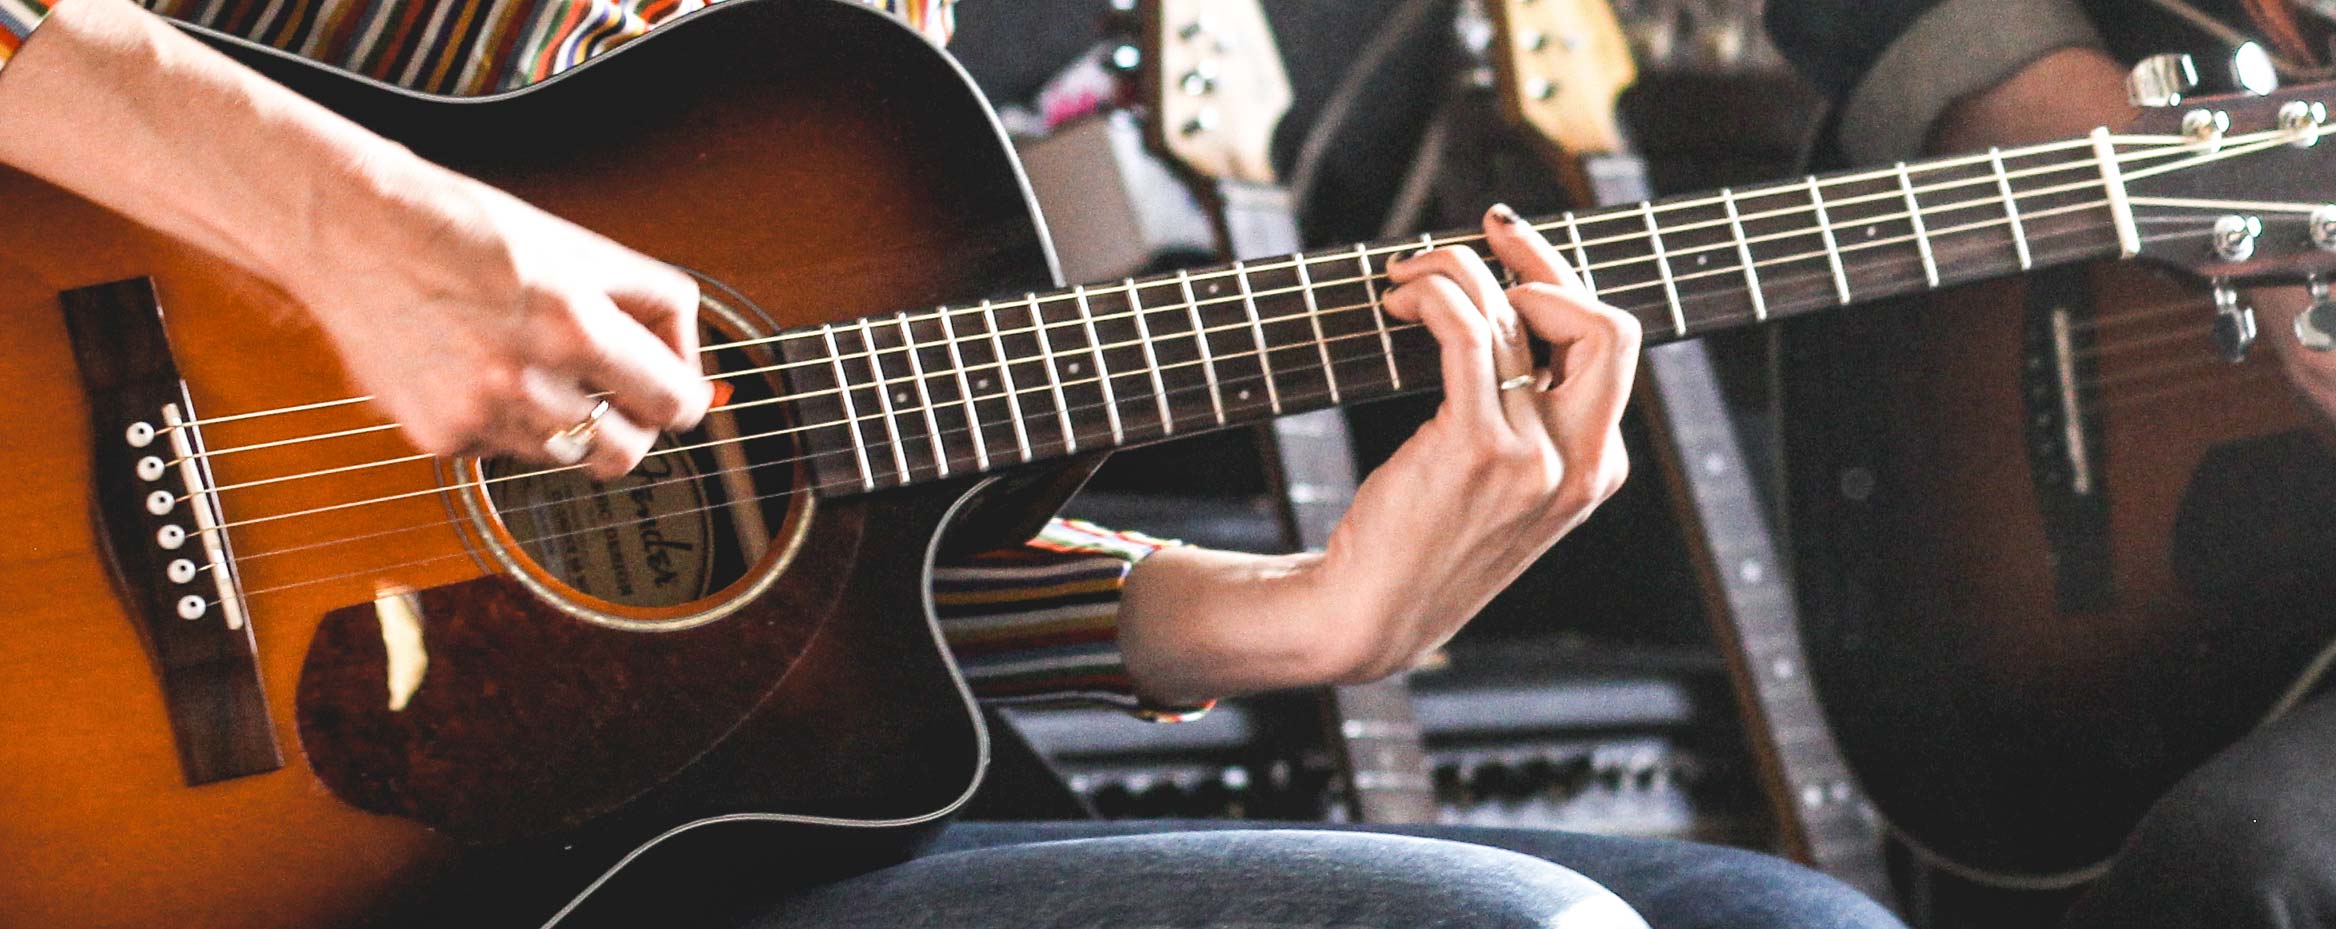 How To Make An Acoustic Guitar Easier To Finger